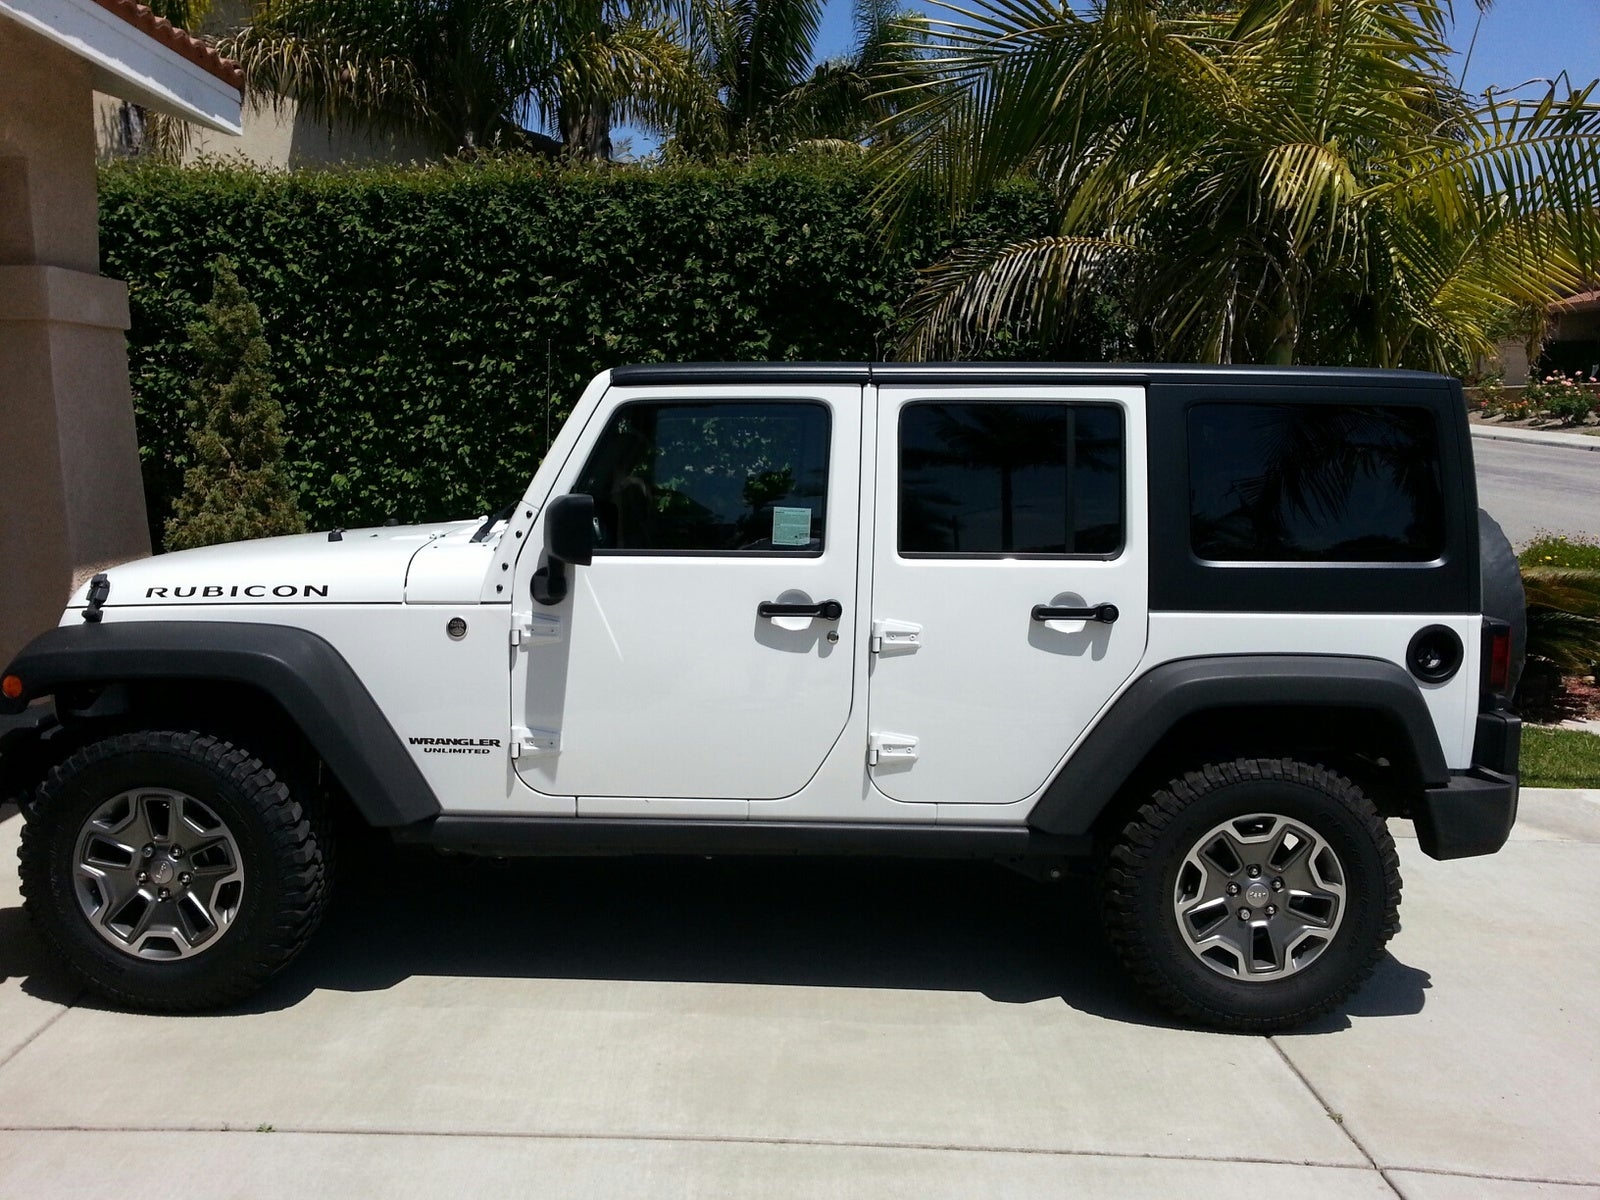 2013 Jeep wrangler unlimited freedom edition reviews #3